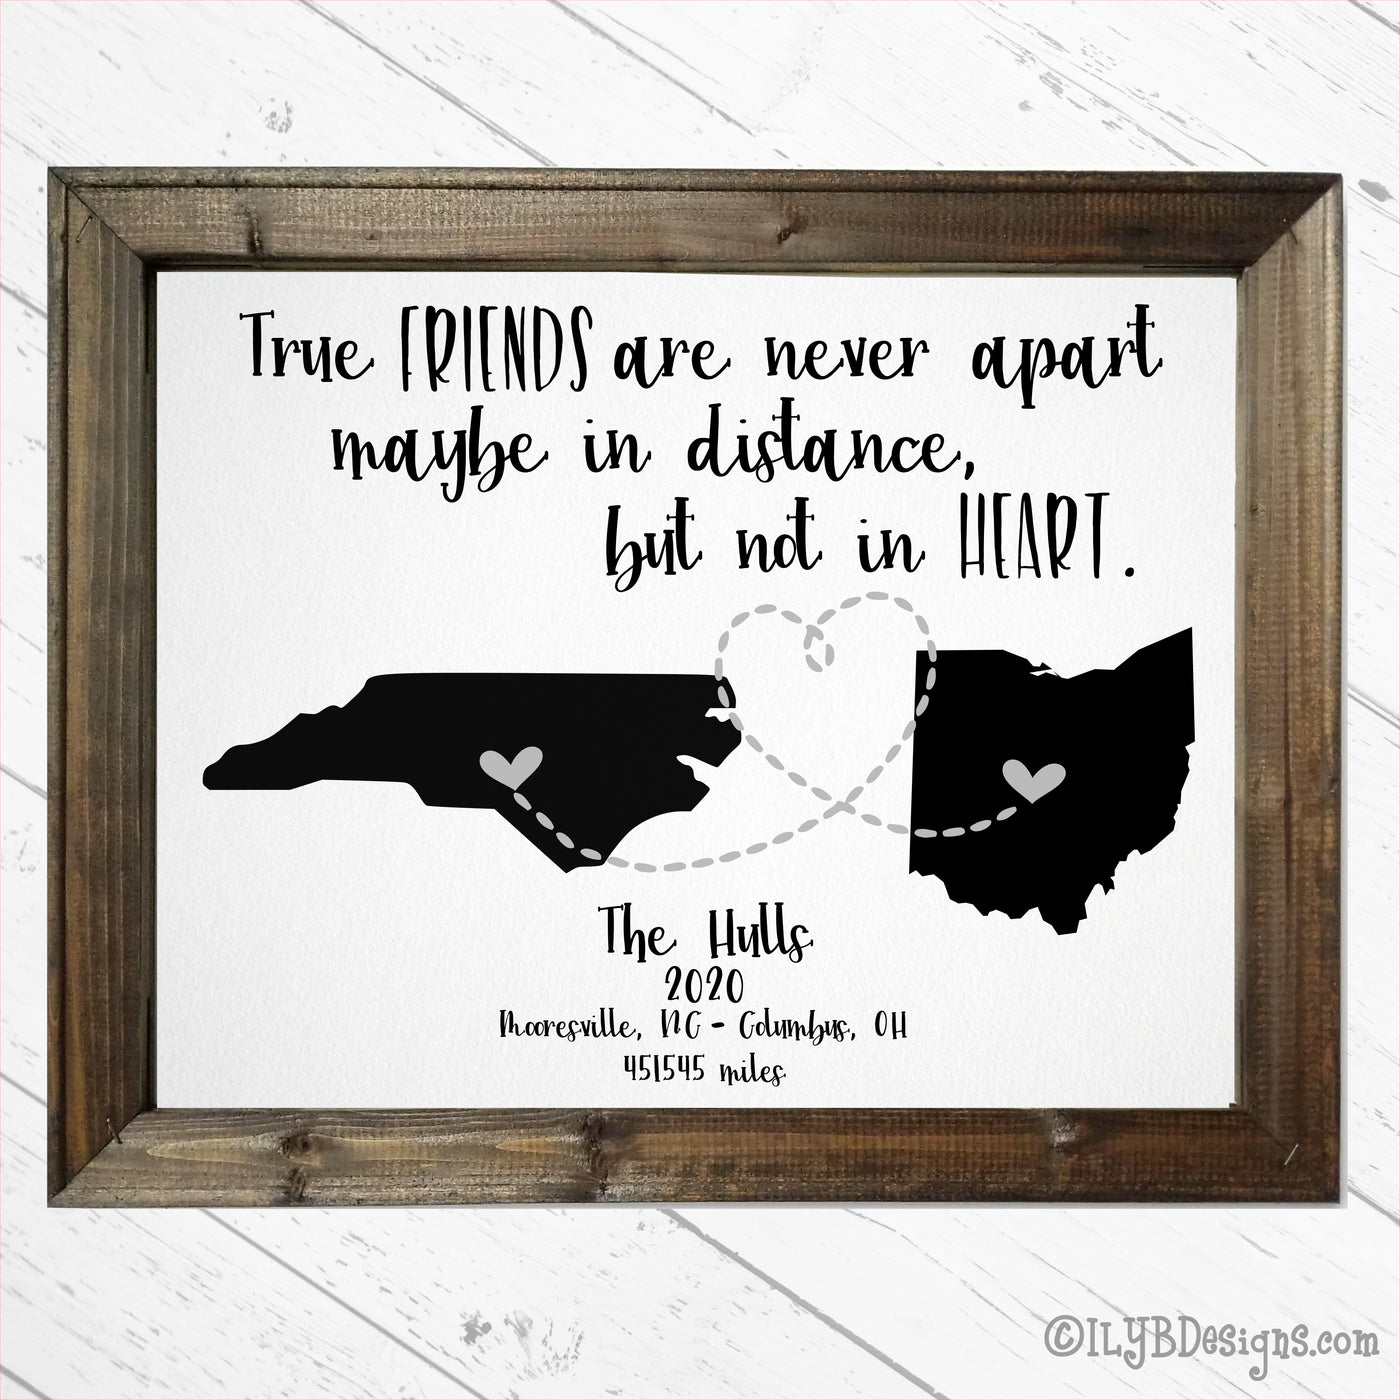 Dark walnut stained frame on a white canvas. Black script writing says, "True friends are never apart, maybe in distance, but not in heart." Below the script are 2 state silhouettes with small hearts and a dotted line heart connecting the 2 states. Under the states is a family name in script, along with the year, then the city and state for both states and the miles that connect the 2 locations. The frame measures 16"x20".